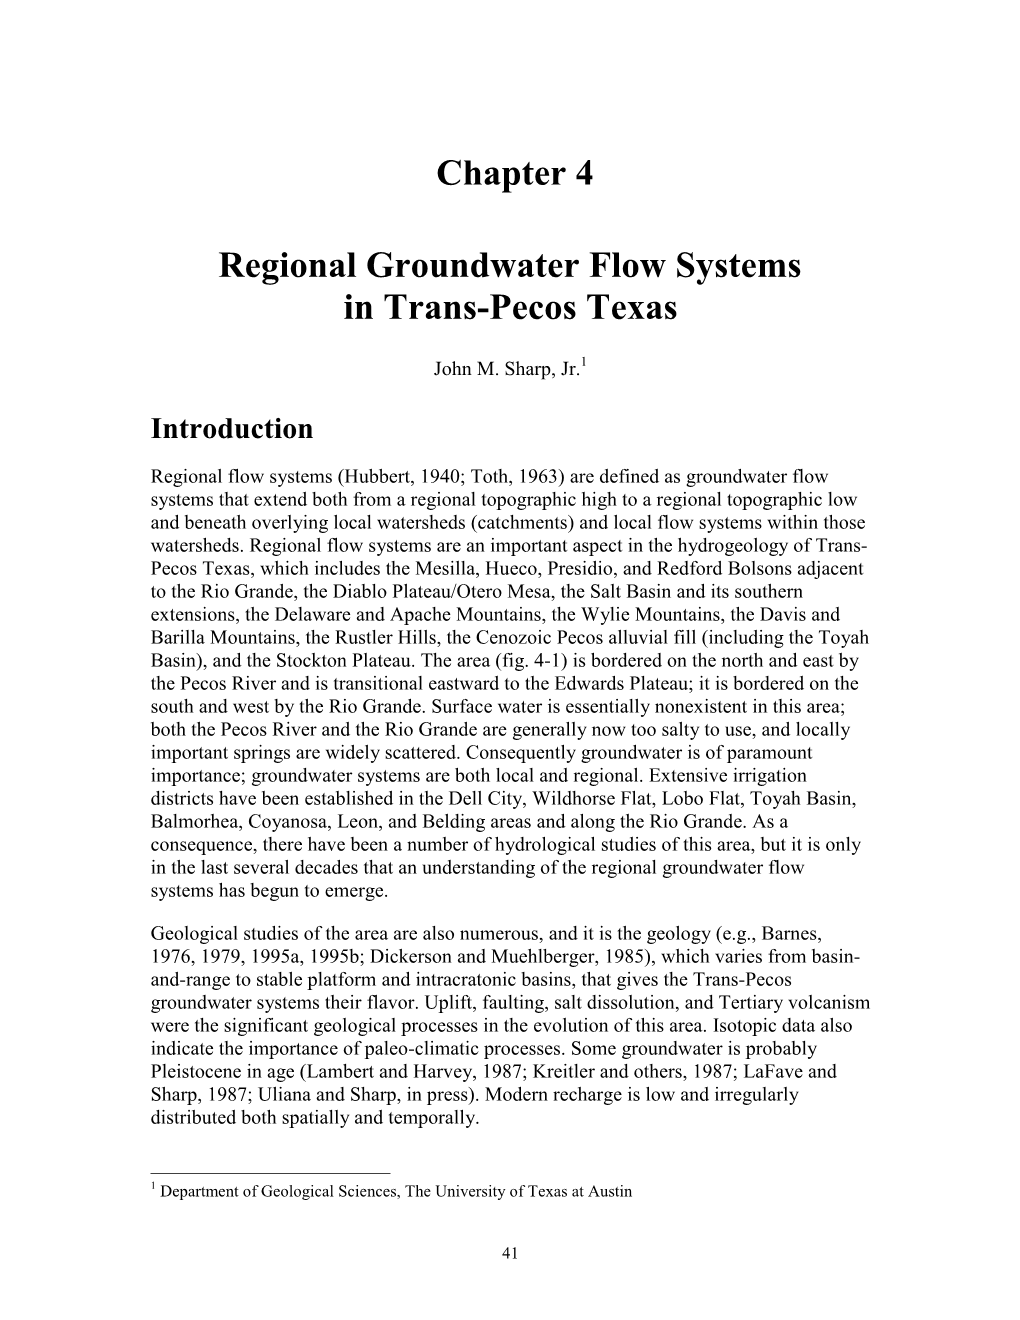 Chapter 4 Regional Groundwater Flow Systems in Trans-Pecos Texas